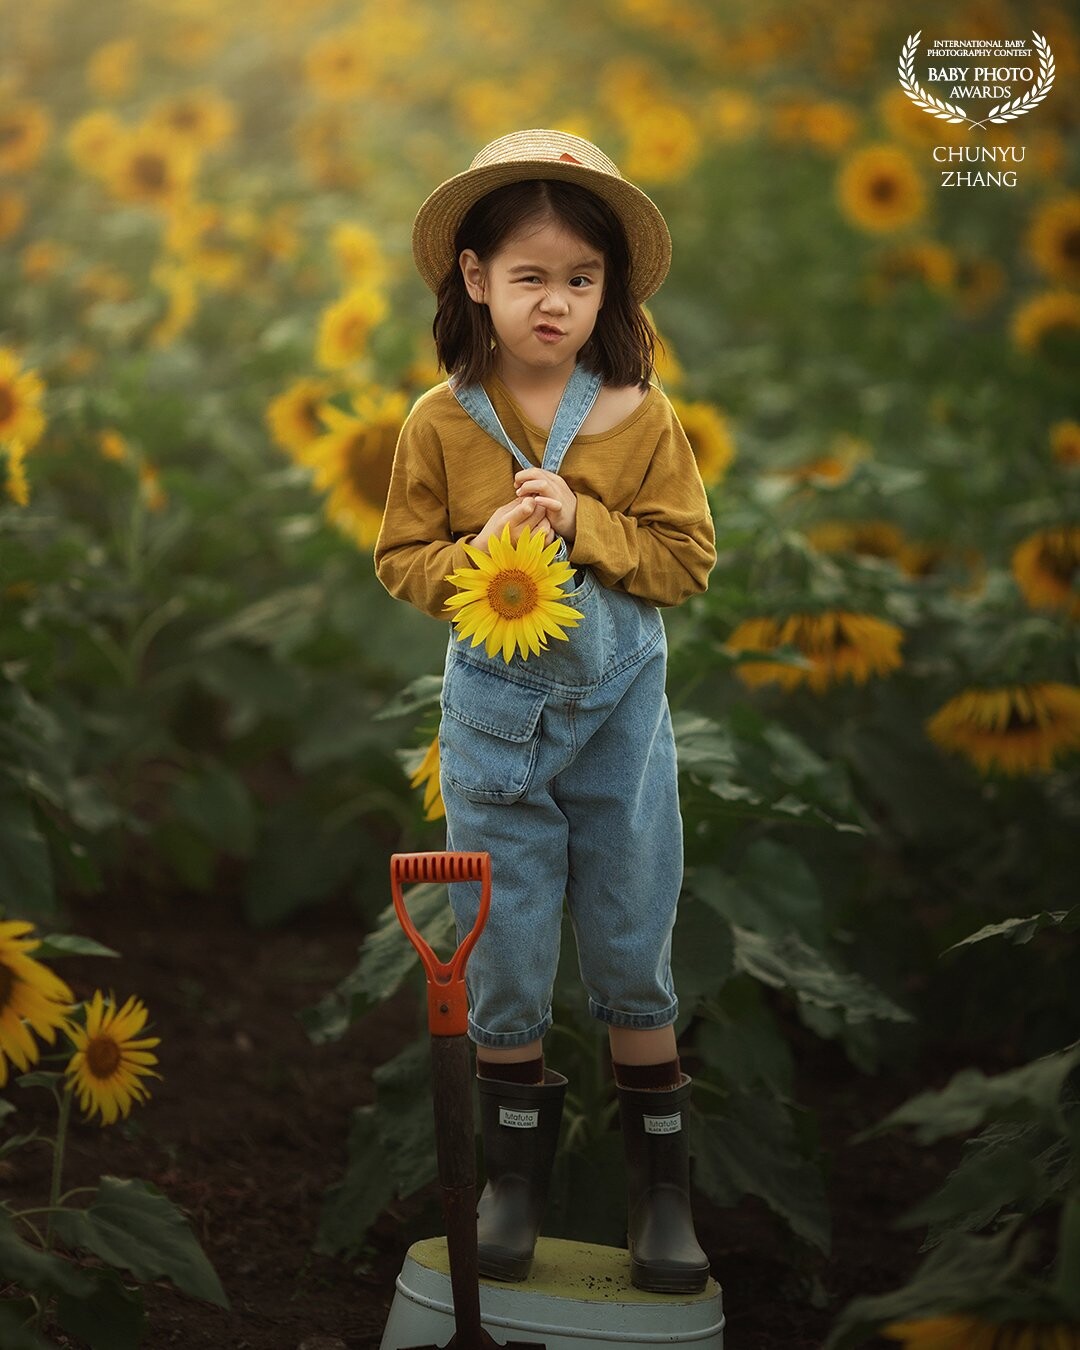 The little girl was working in the sunflower field. When she got tired, she climbed up on a small stool, picked a sunflower, and started to make faces.